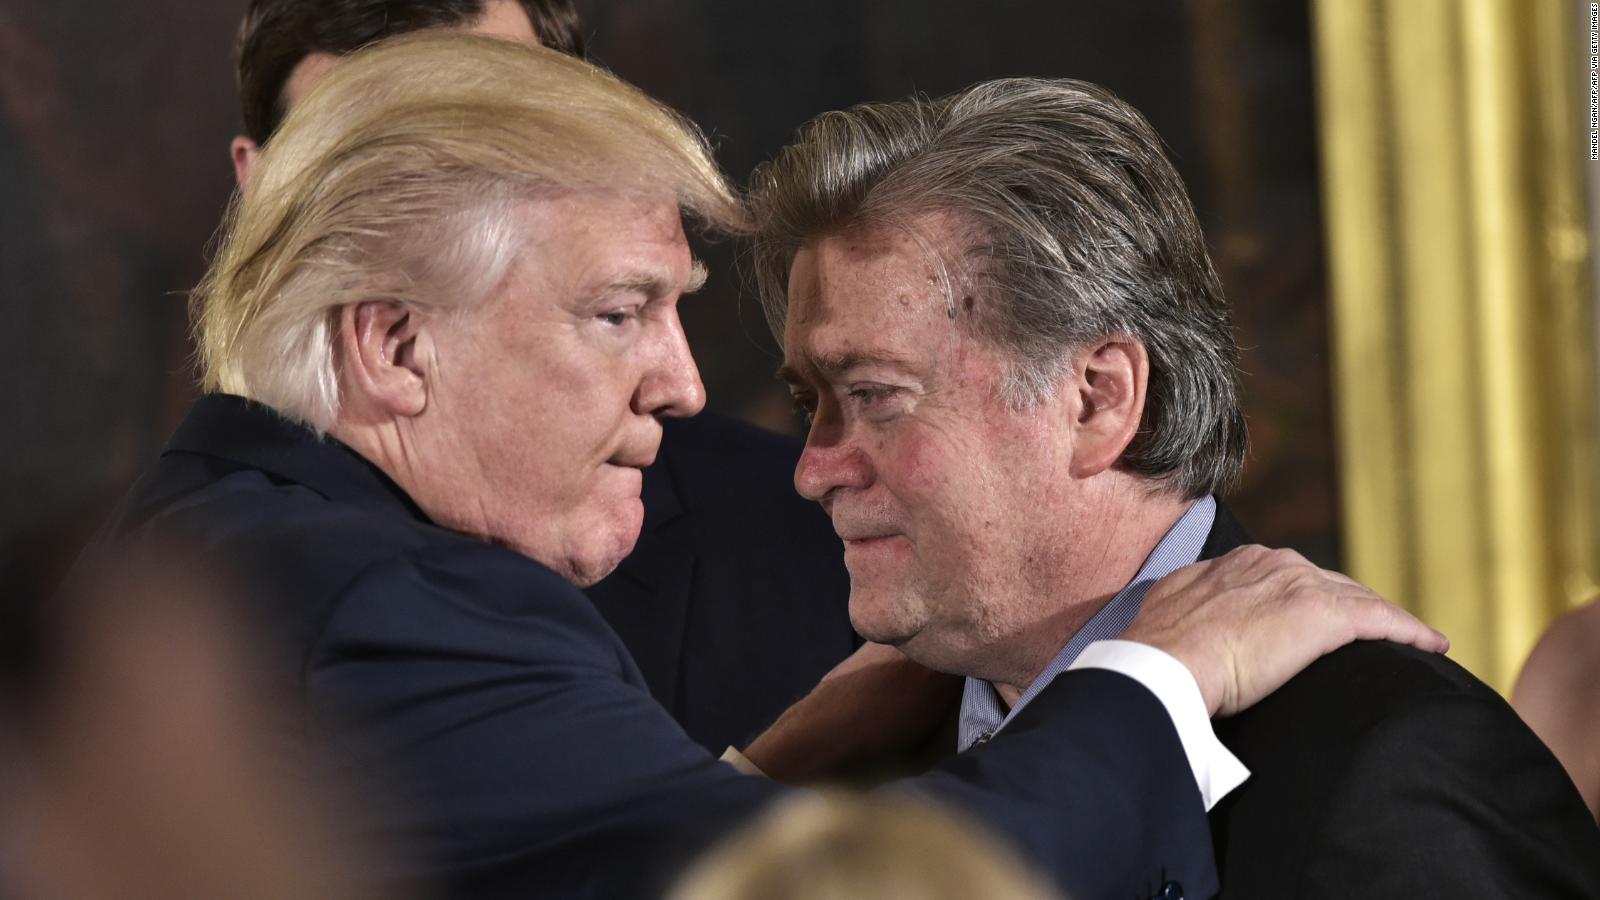 Trump reacts to the arrest of his former adviser Steve Bannon